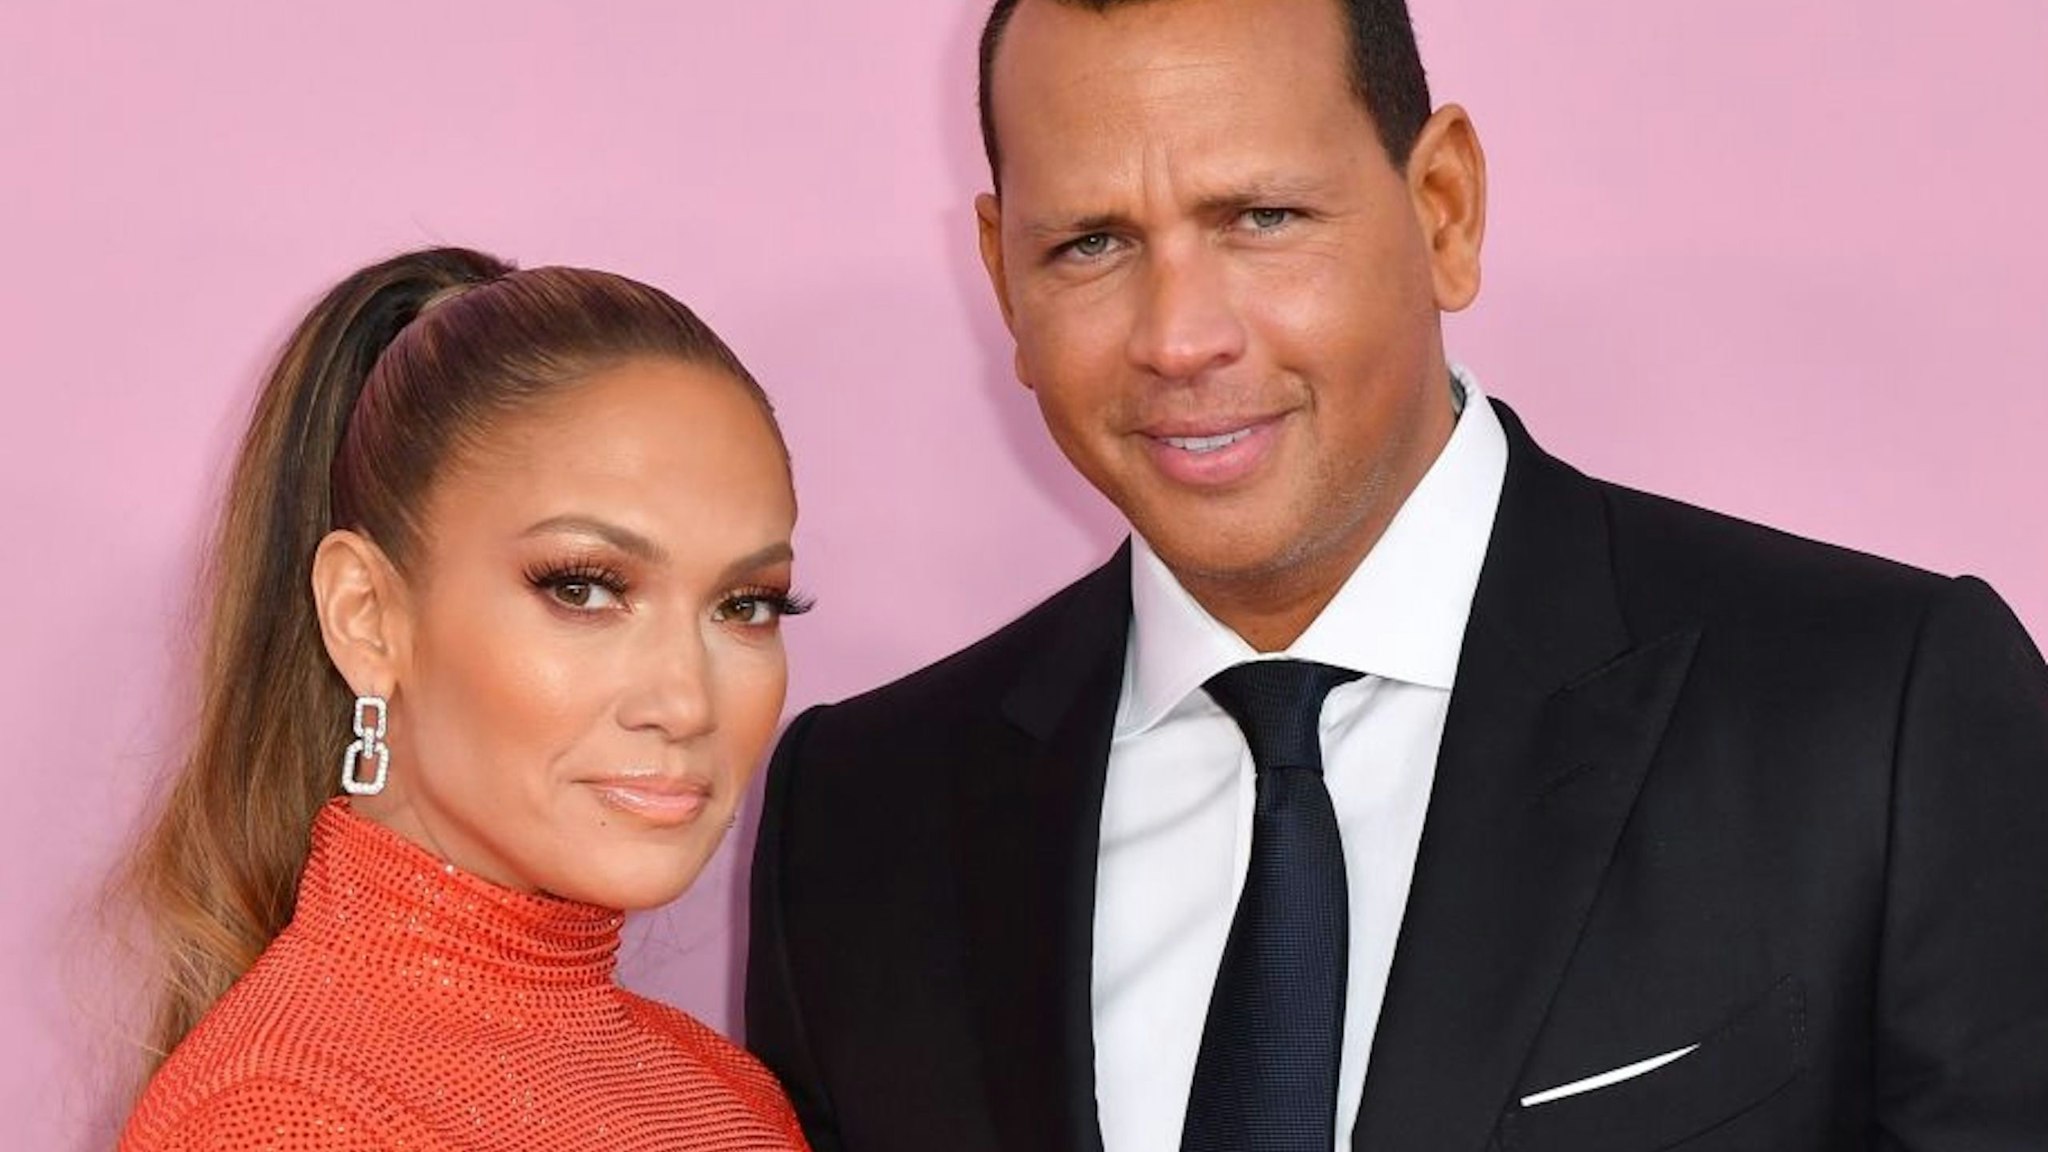 CFDA Fashion Icon Award recipient US singer Jennifer Lopez and fiance former baseball pro Alex Rodriguez arrive for the 2019 CFDA fashion awards at the Brooklyn Museum in New York City on June 3, 2019. (Photo by ANGELA WEISS / AFP)